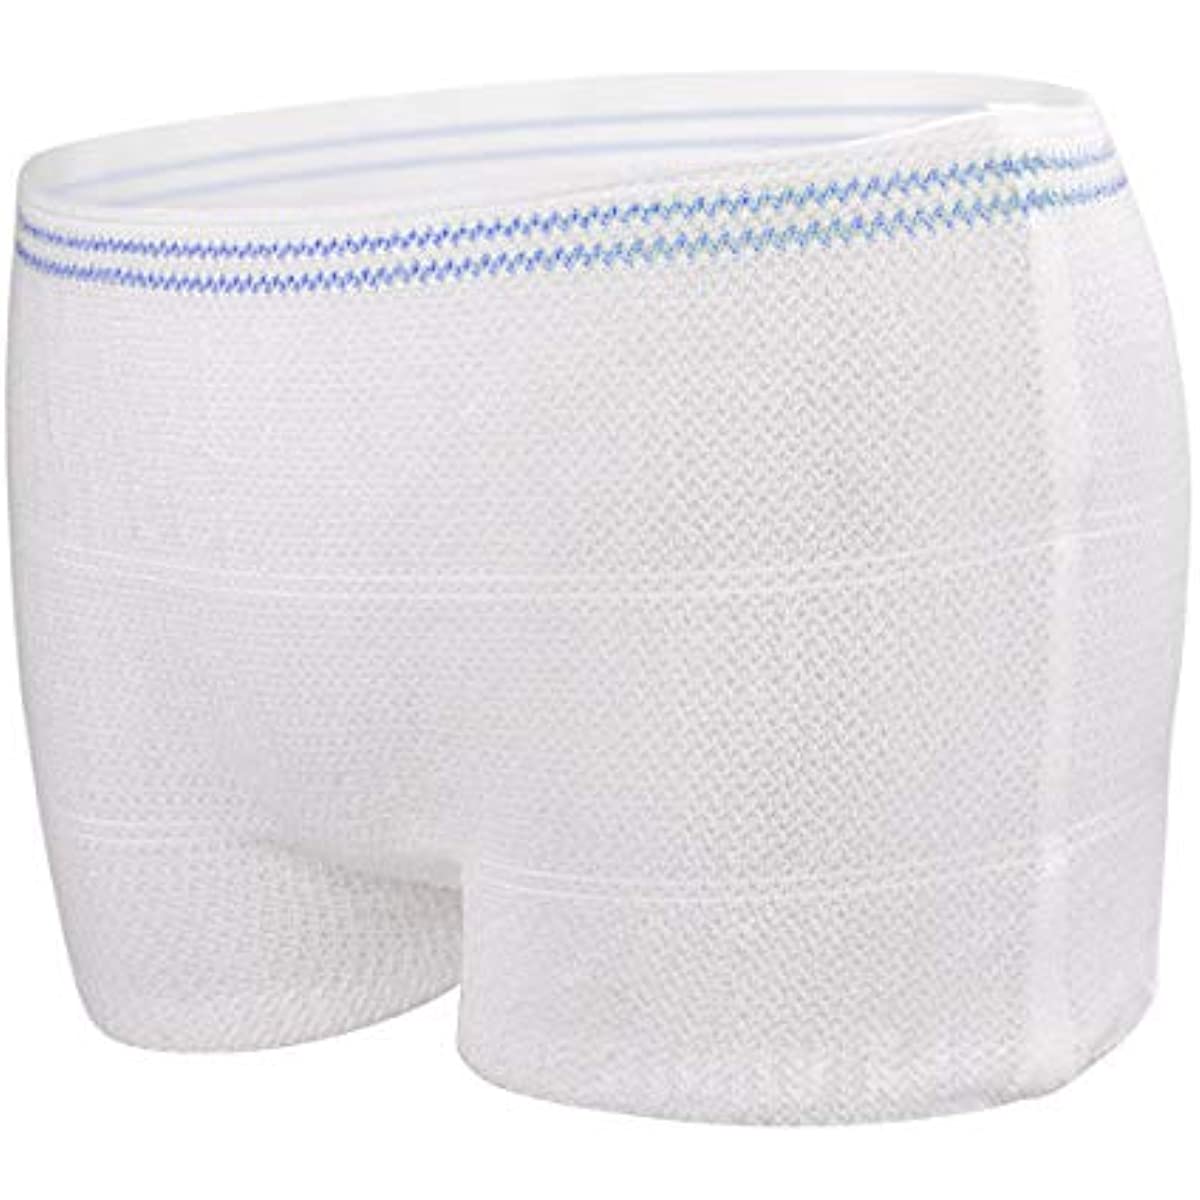 Mesh Underwear Postpartum Disposable C-Section Recovery Maternity Panties  Briefs Stretchy, Lightweight 2721-15